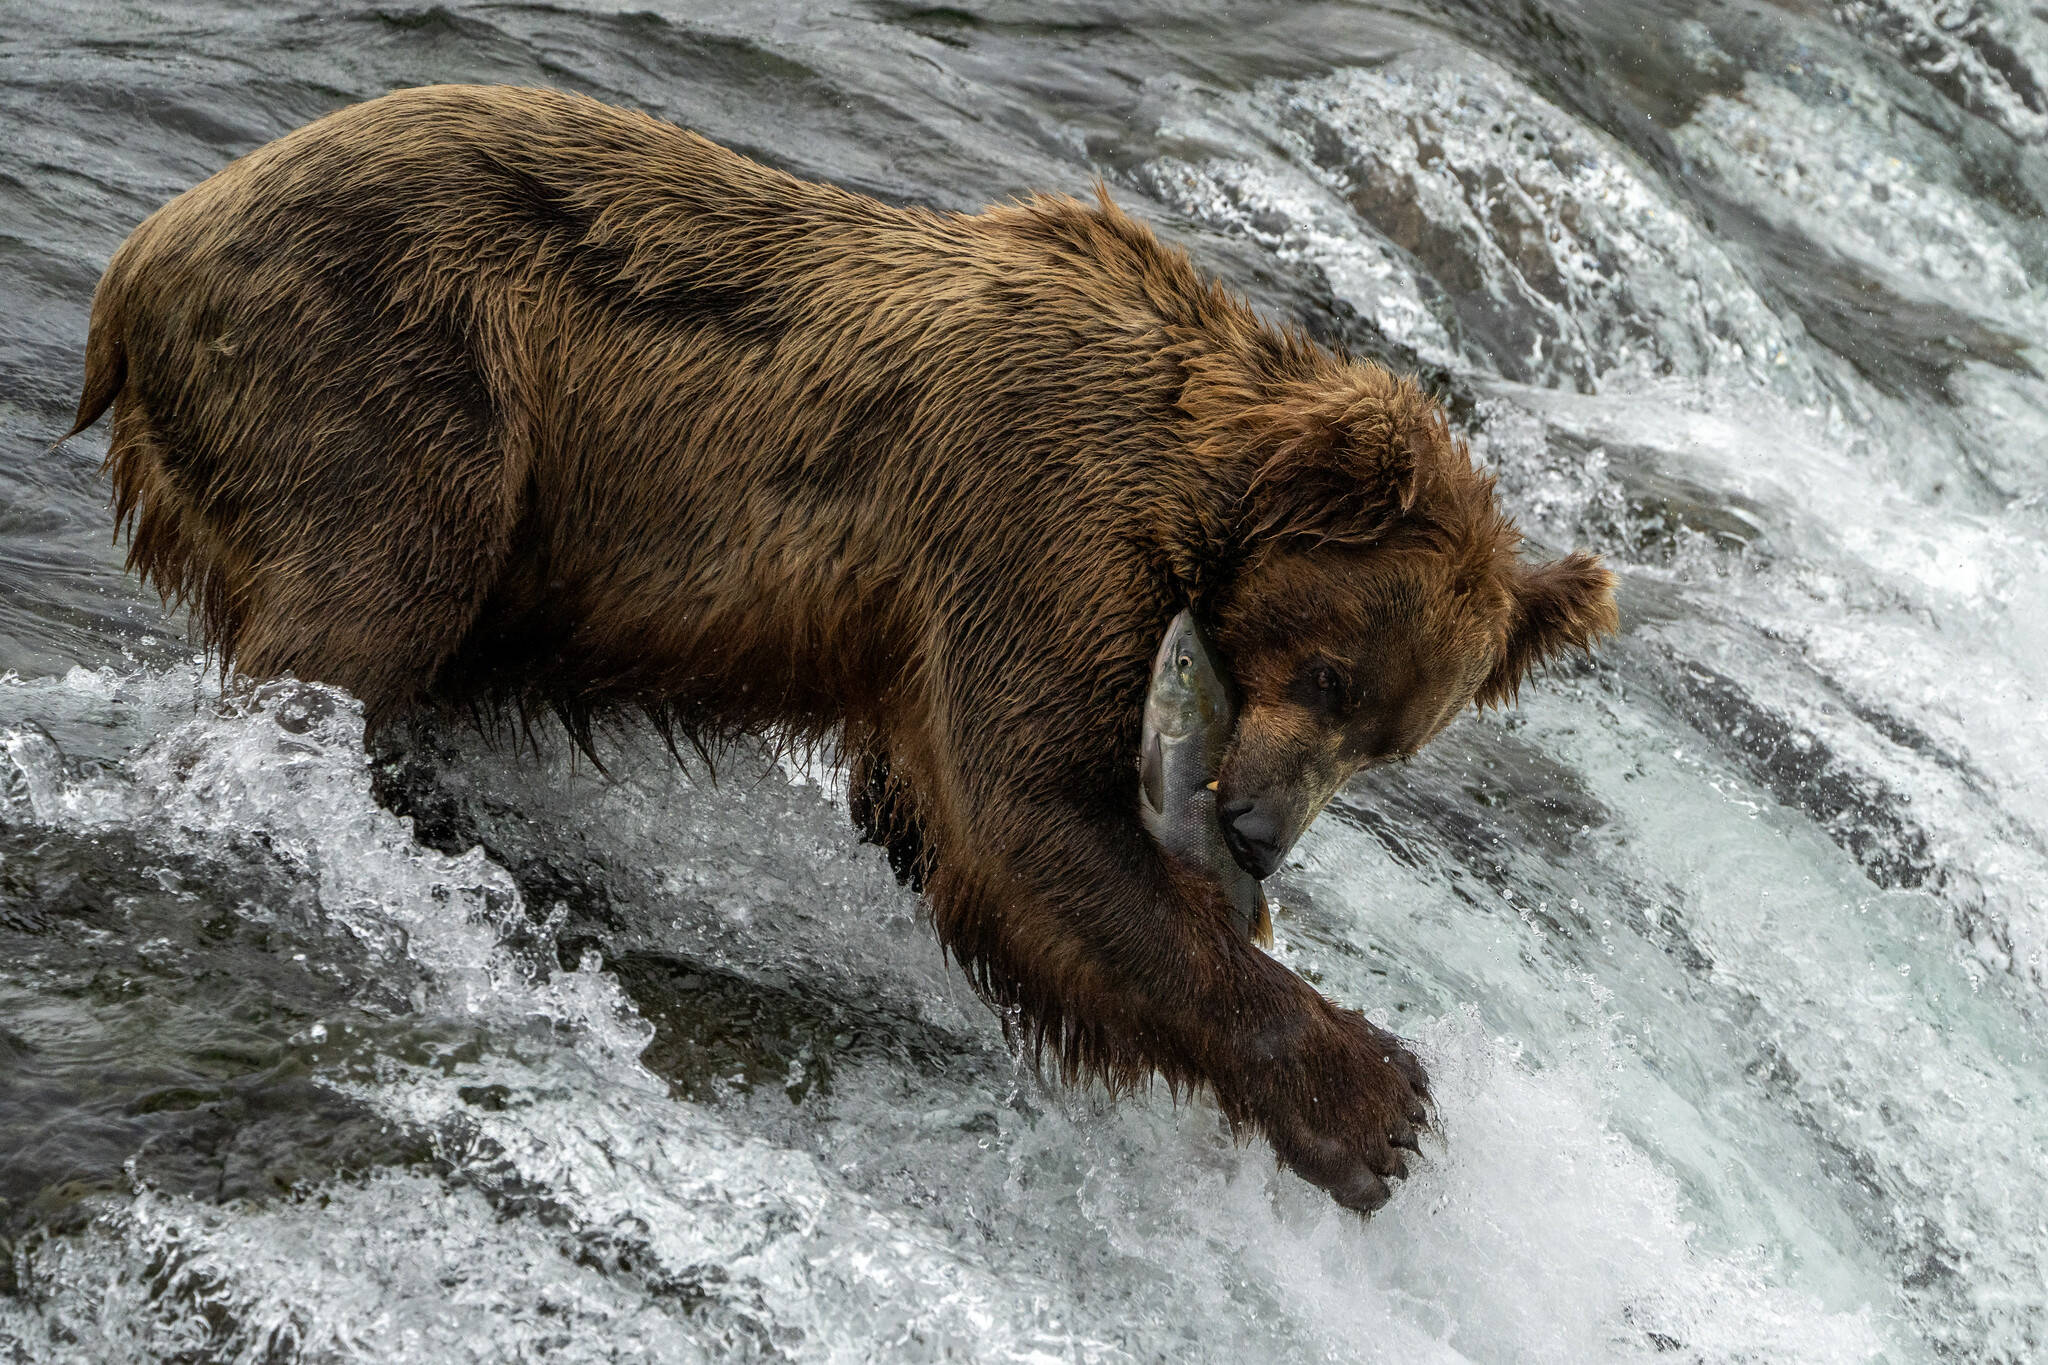 A bear feasts on the salmon run at Katmai National Park and Preserve on July 13, 2021. (Courtesy of Lian Law, National Parks Service)